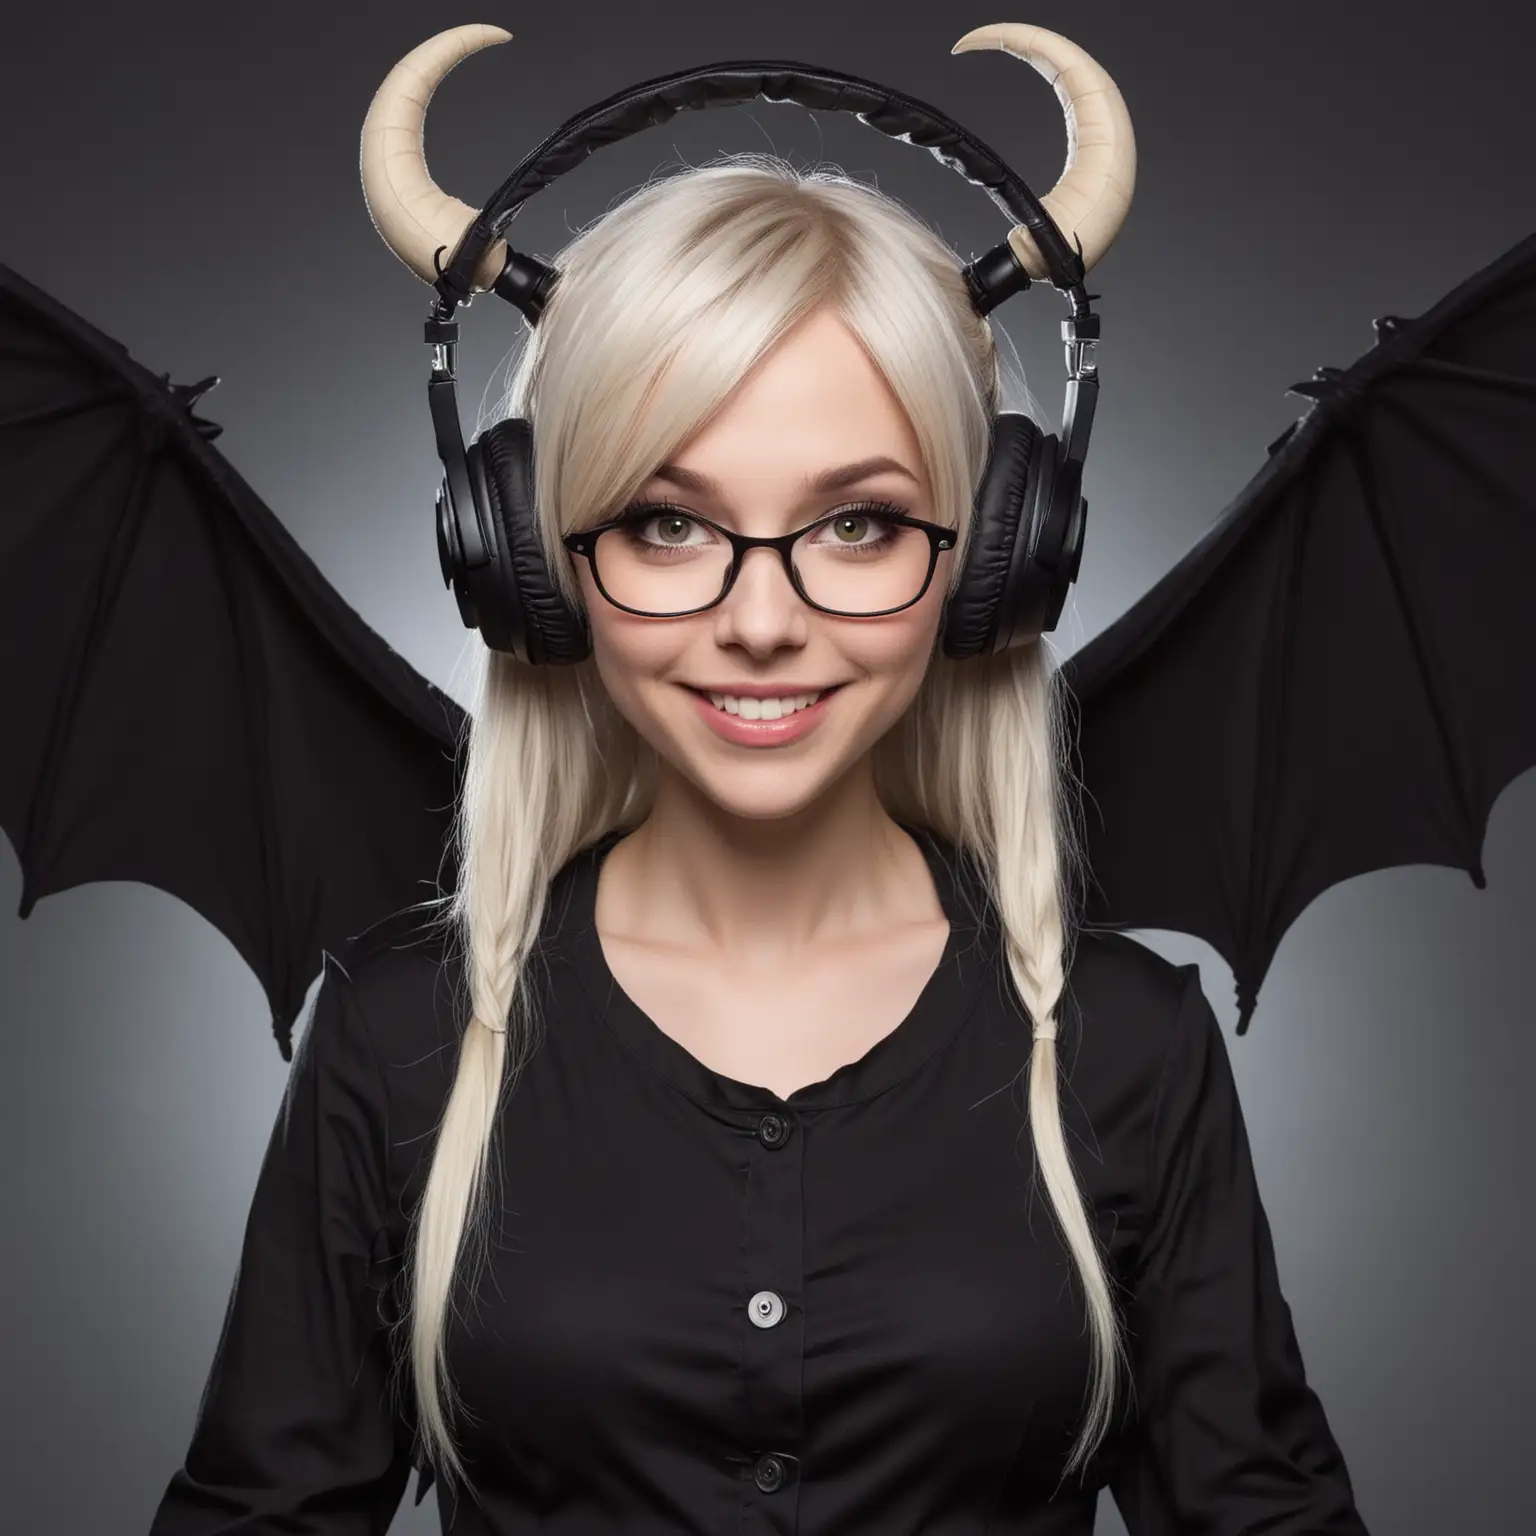 Aurora 45YearOld Emo Singer with Bat Wings and Horns